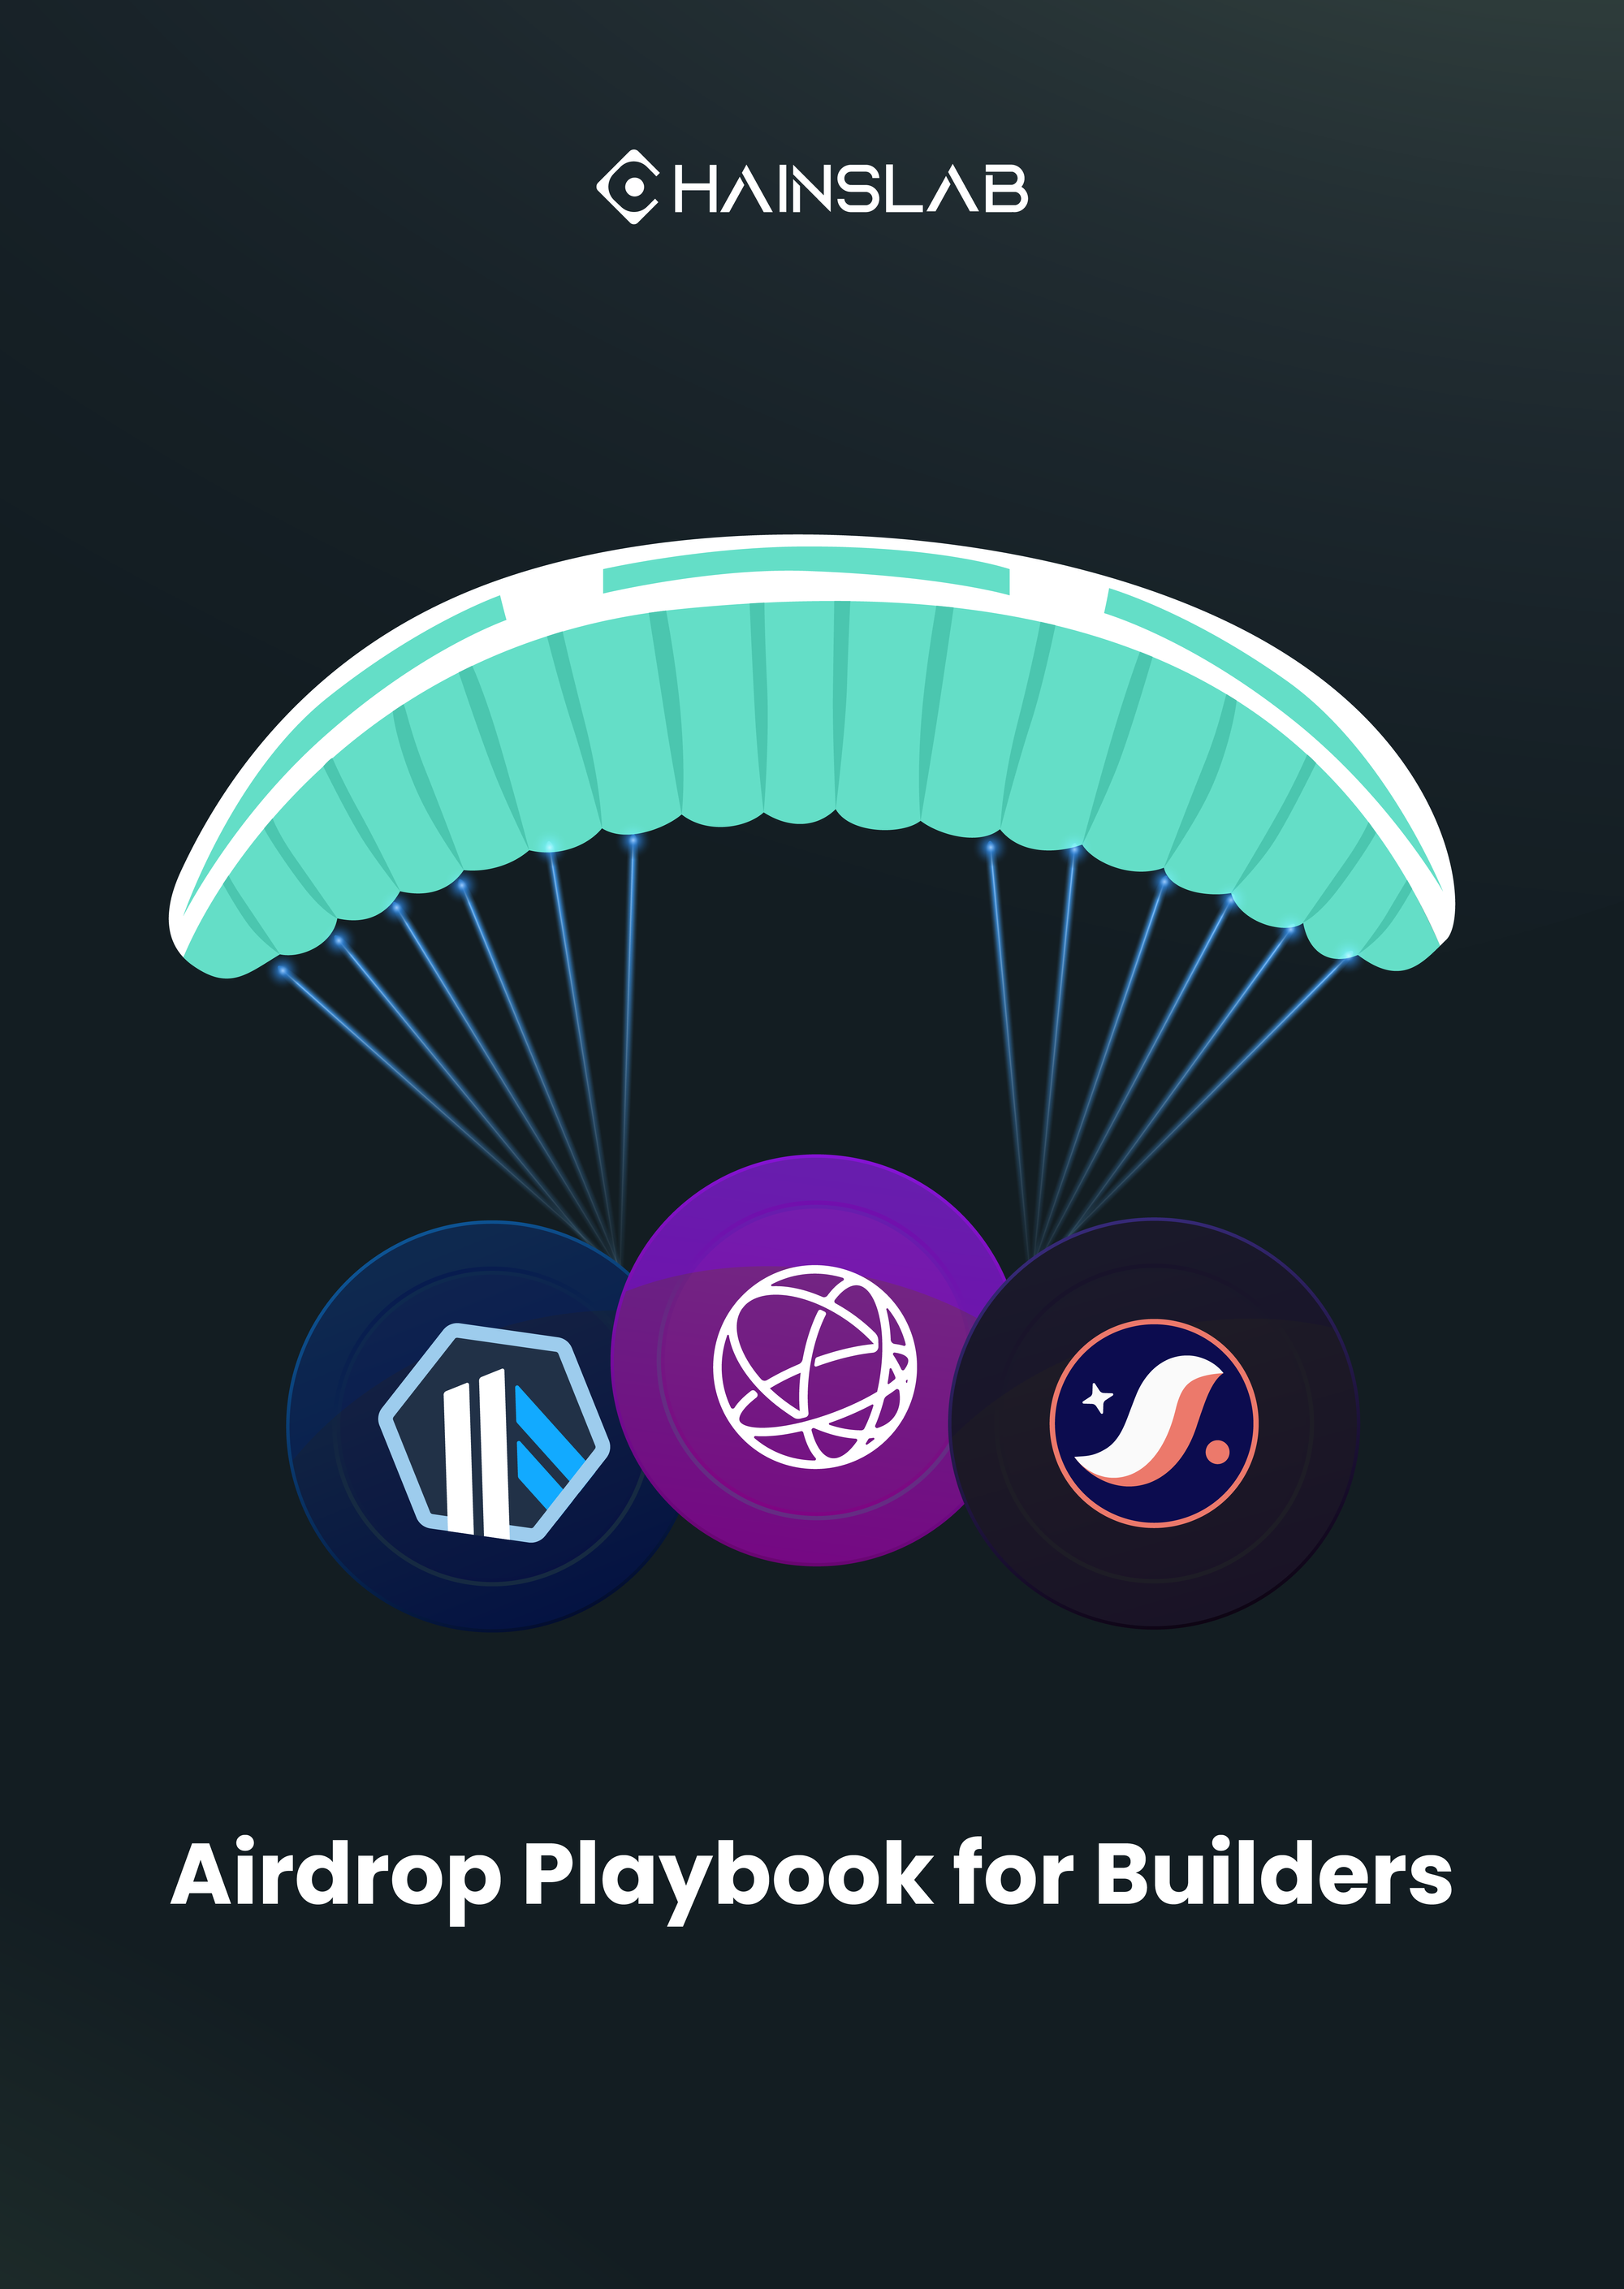 Airdrop Playbook: A Basic Guide for Builders to design an Airdrop campaign